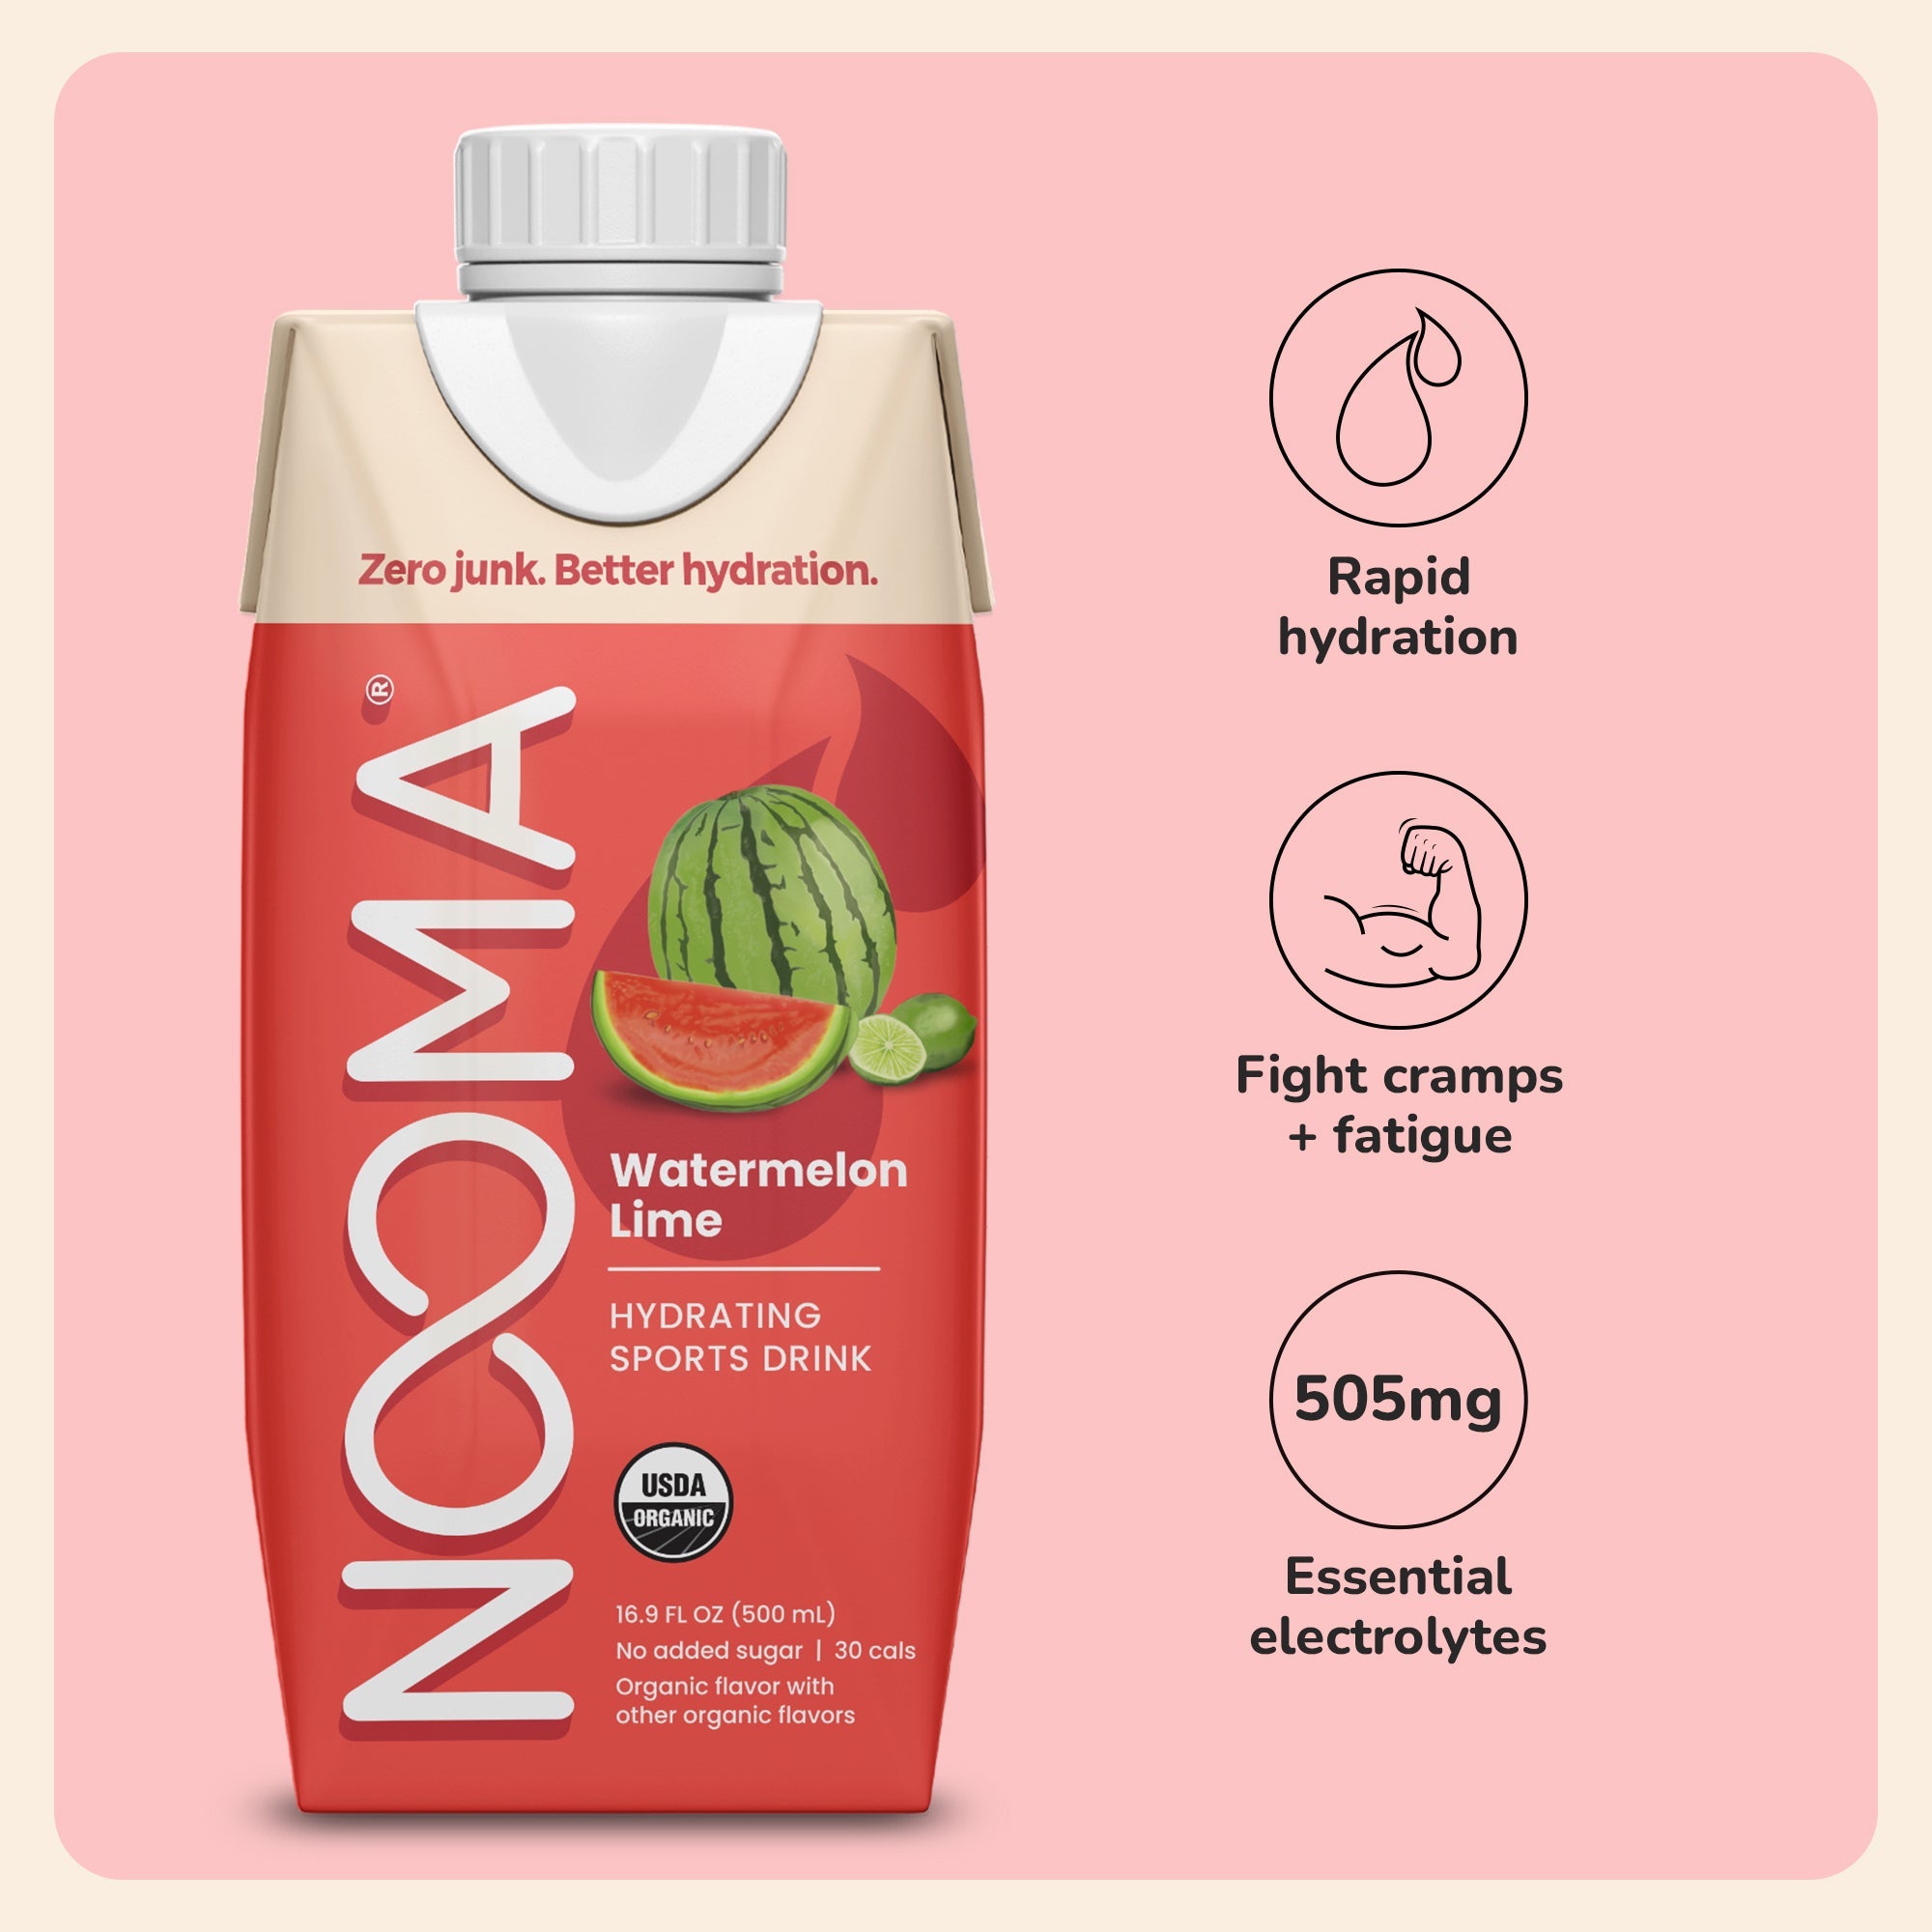 Nooma Watermelon Lime